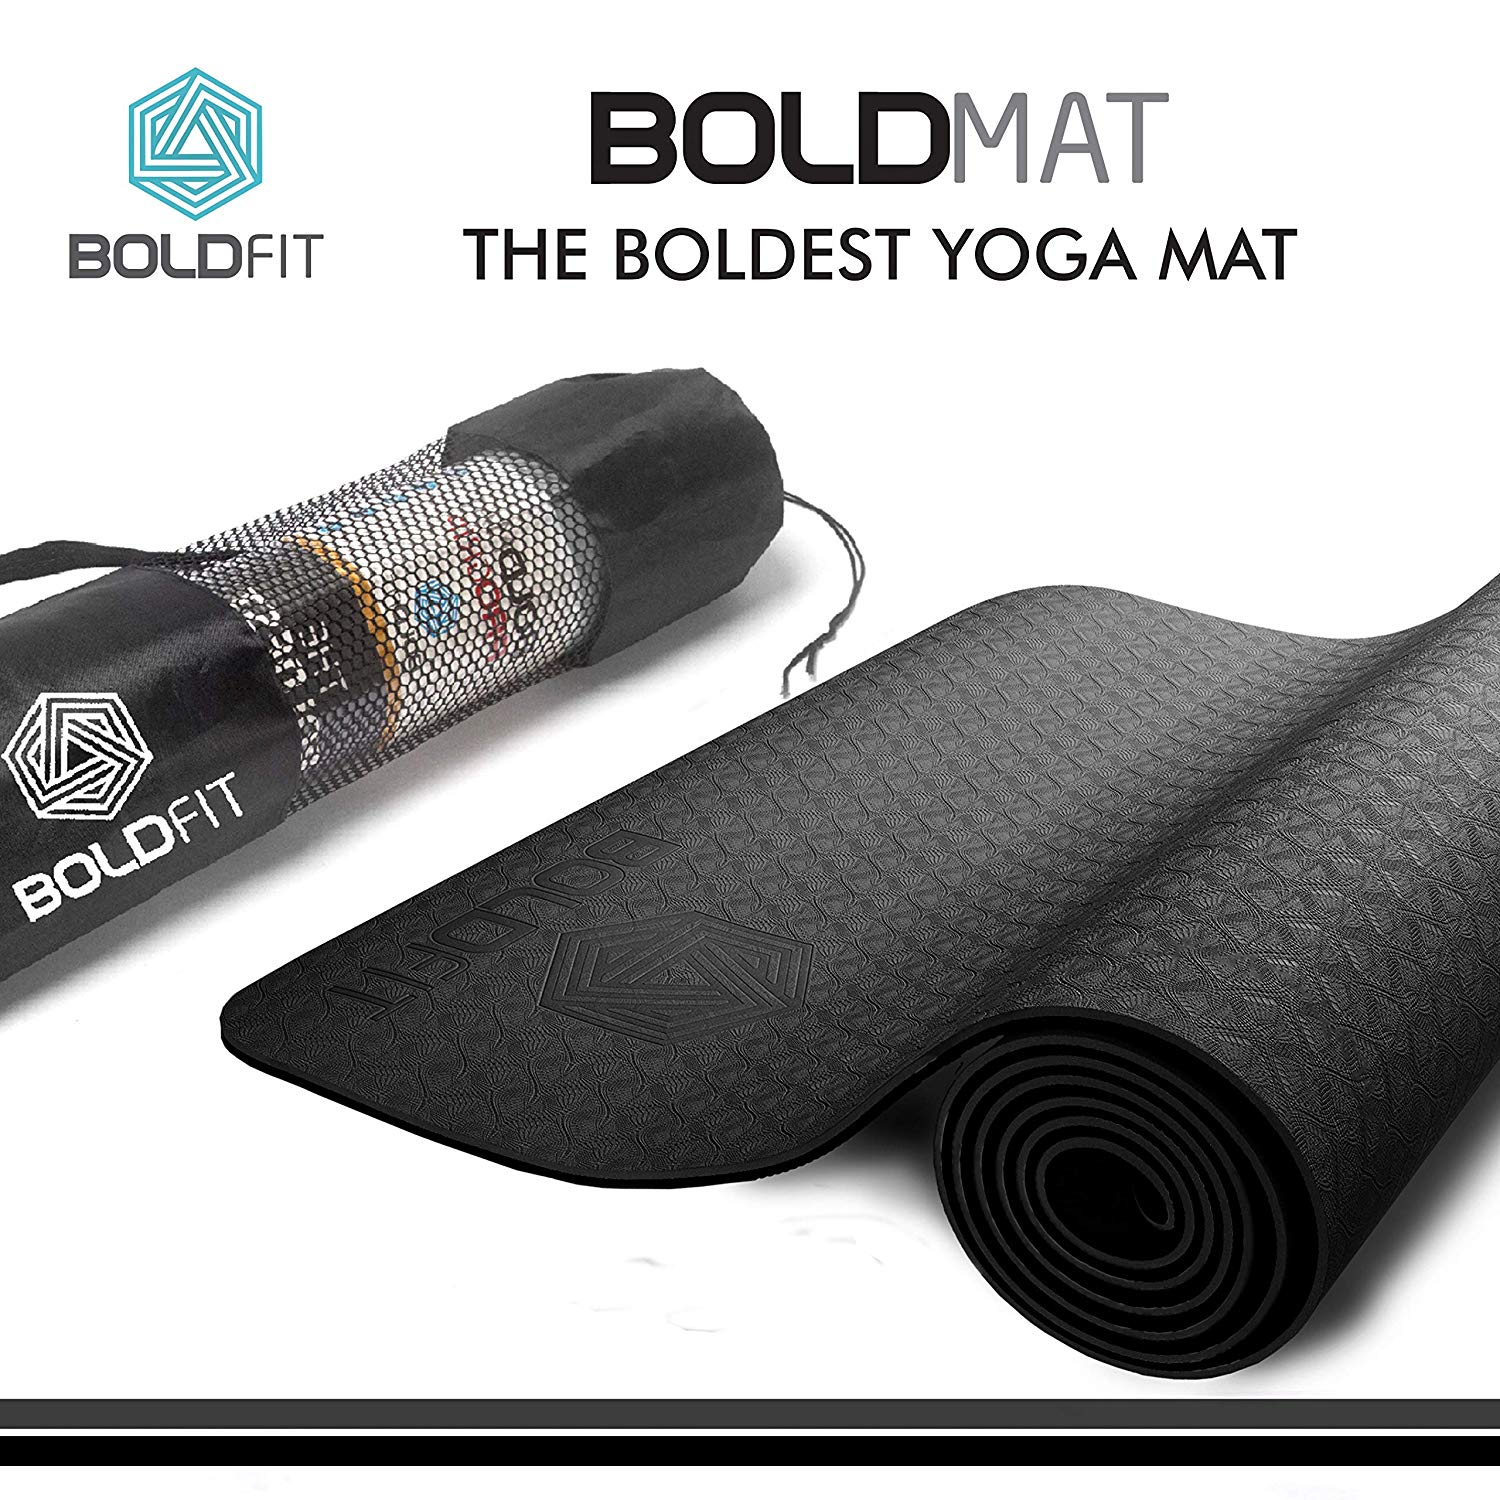 Boldfit Exercise Mats in Hubli - Dealers, Manufacturers